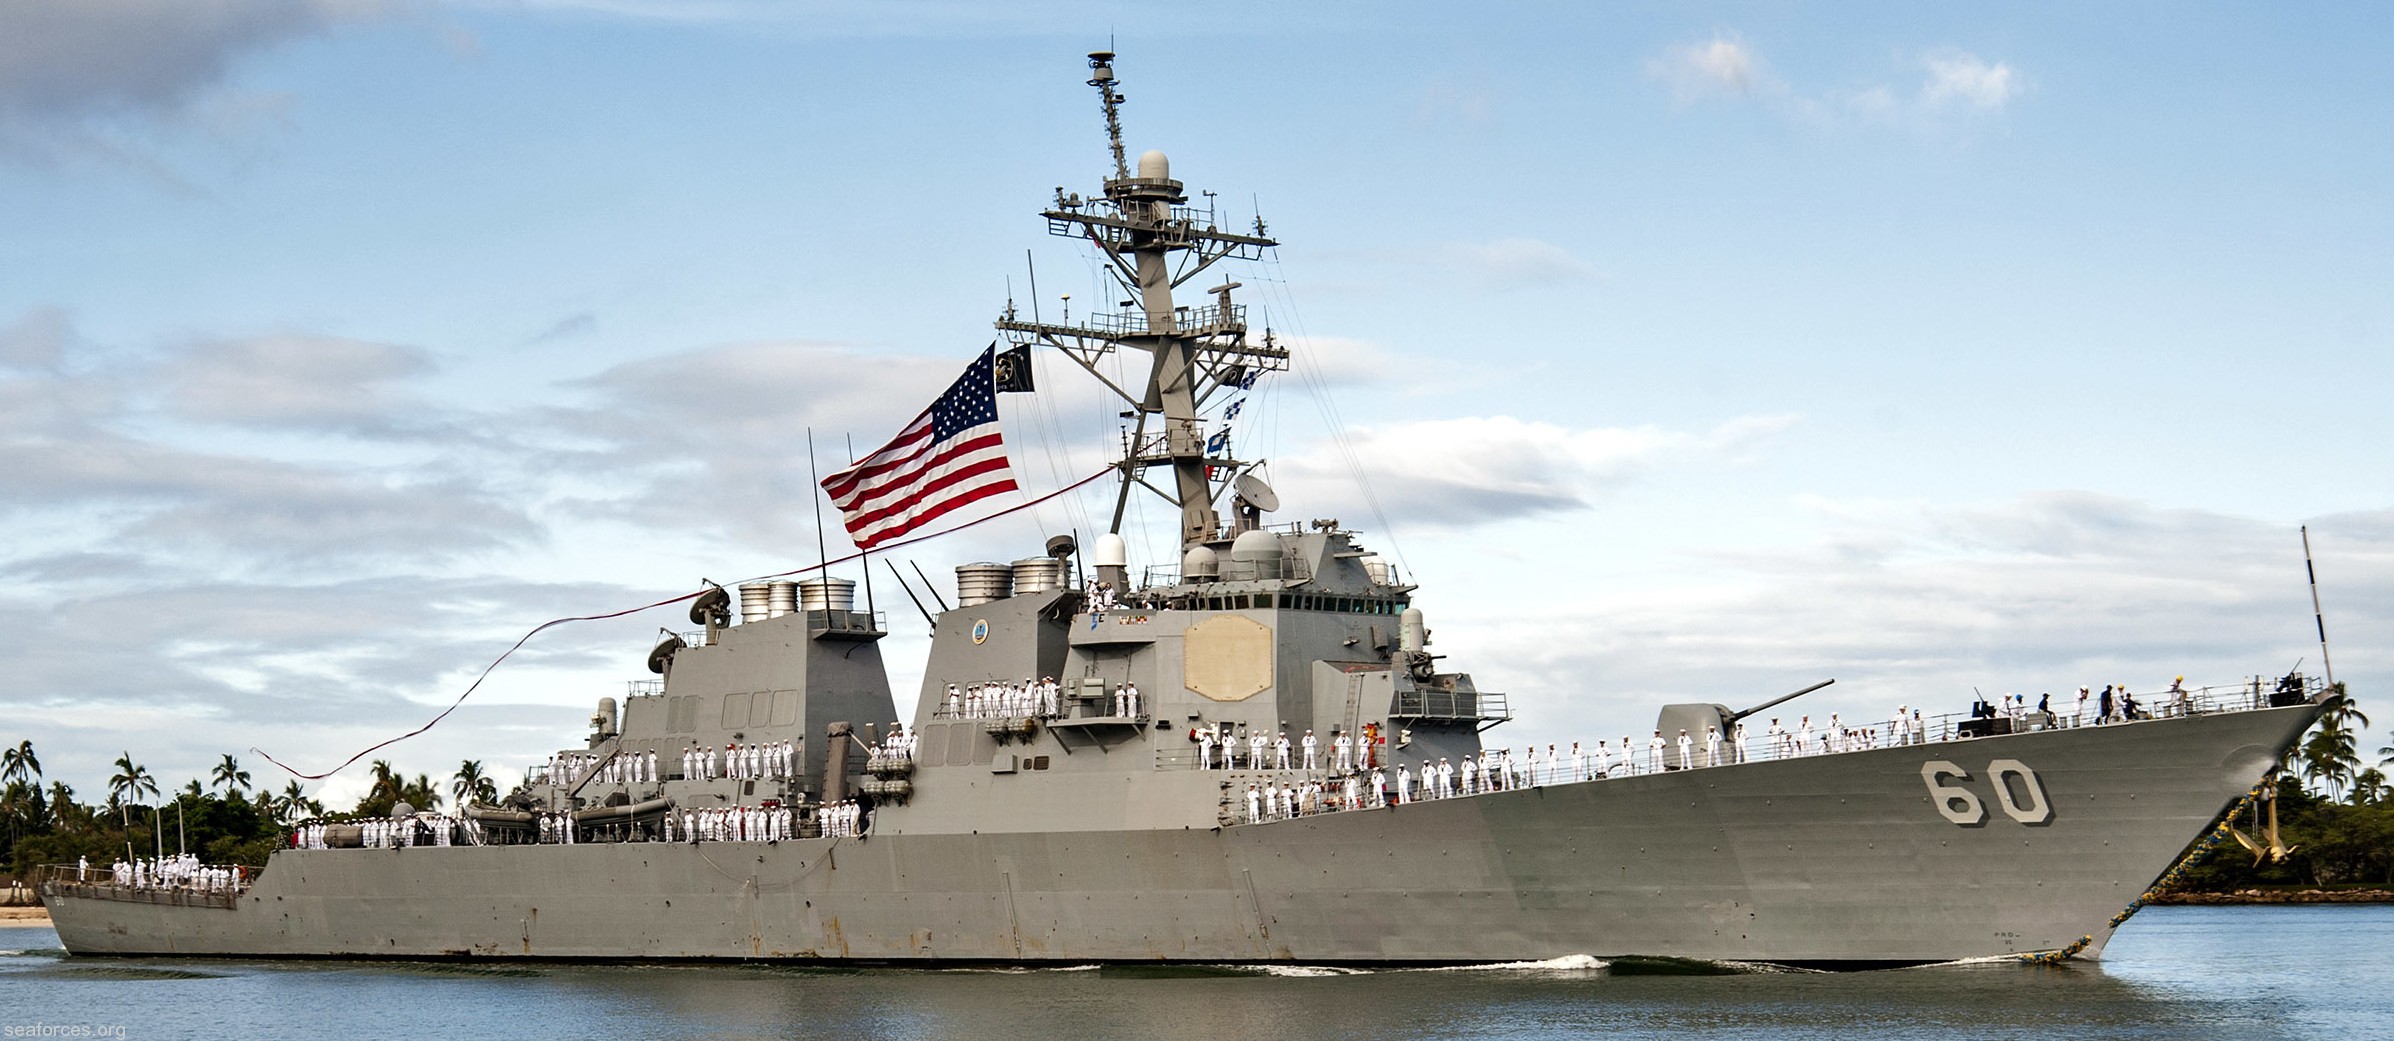 ddg-60 uss paul hamilton guided missile destroyer us navy 74